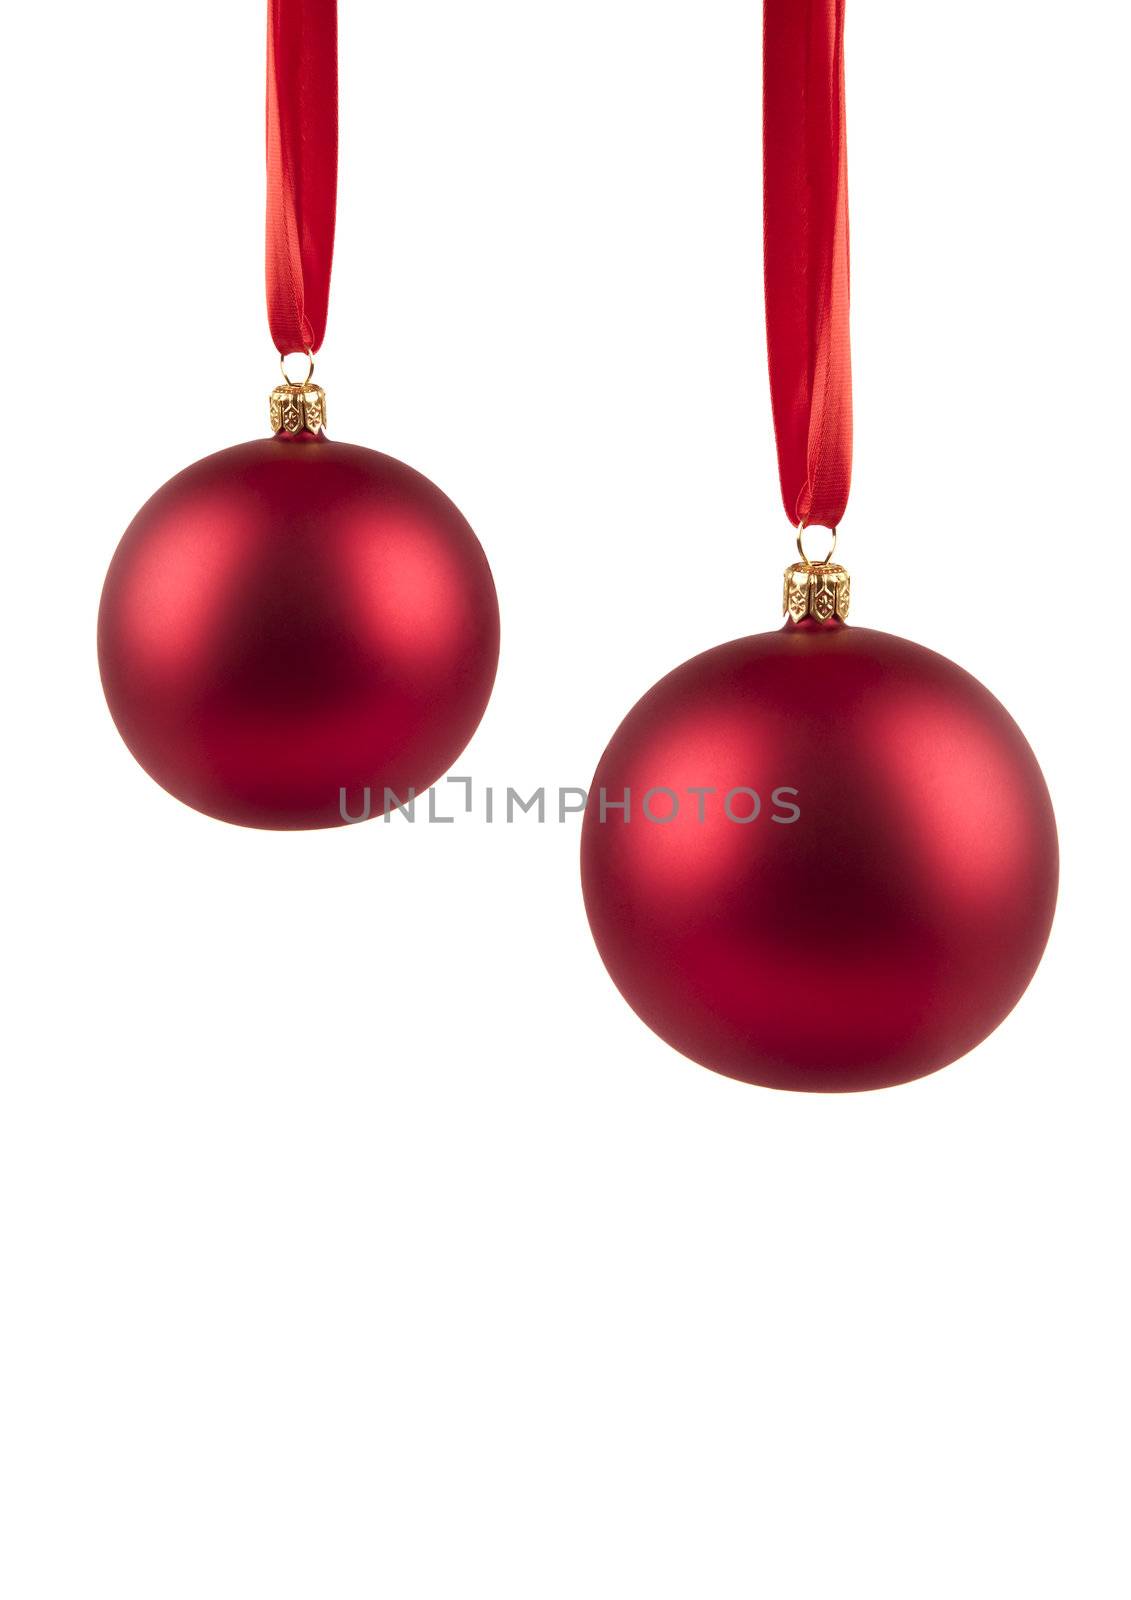 isolated red balls on white background